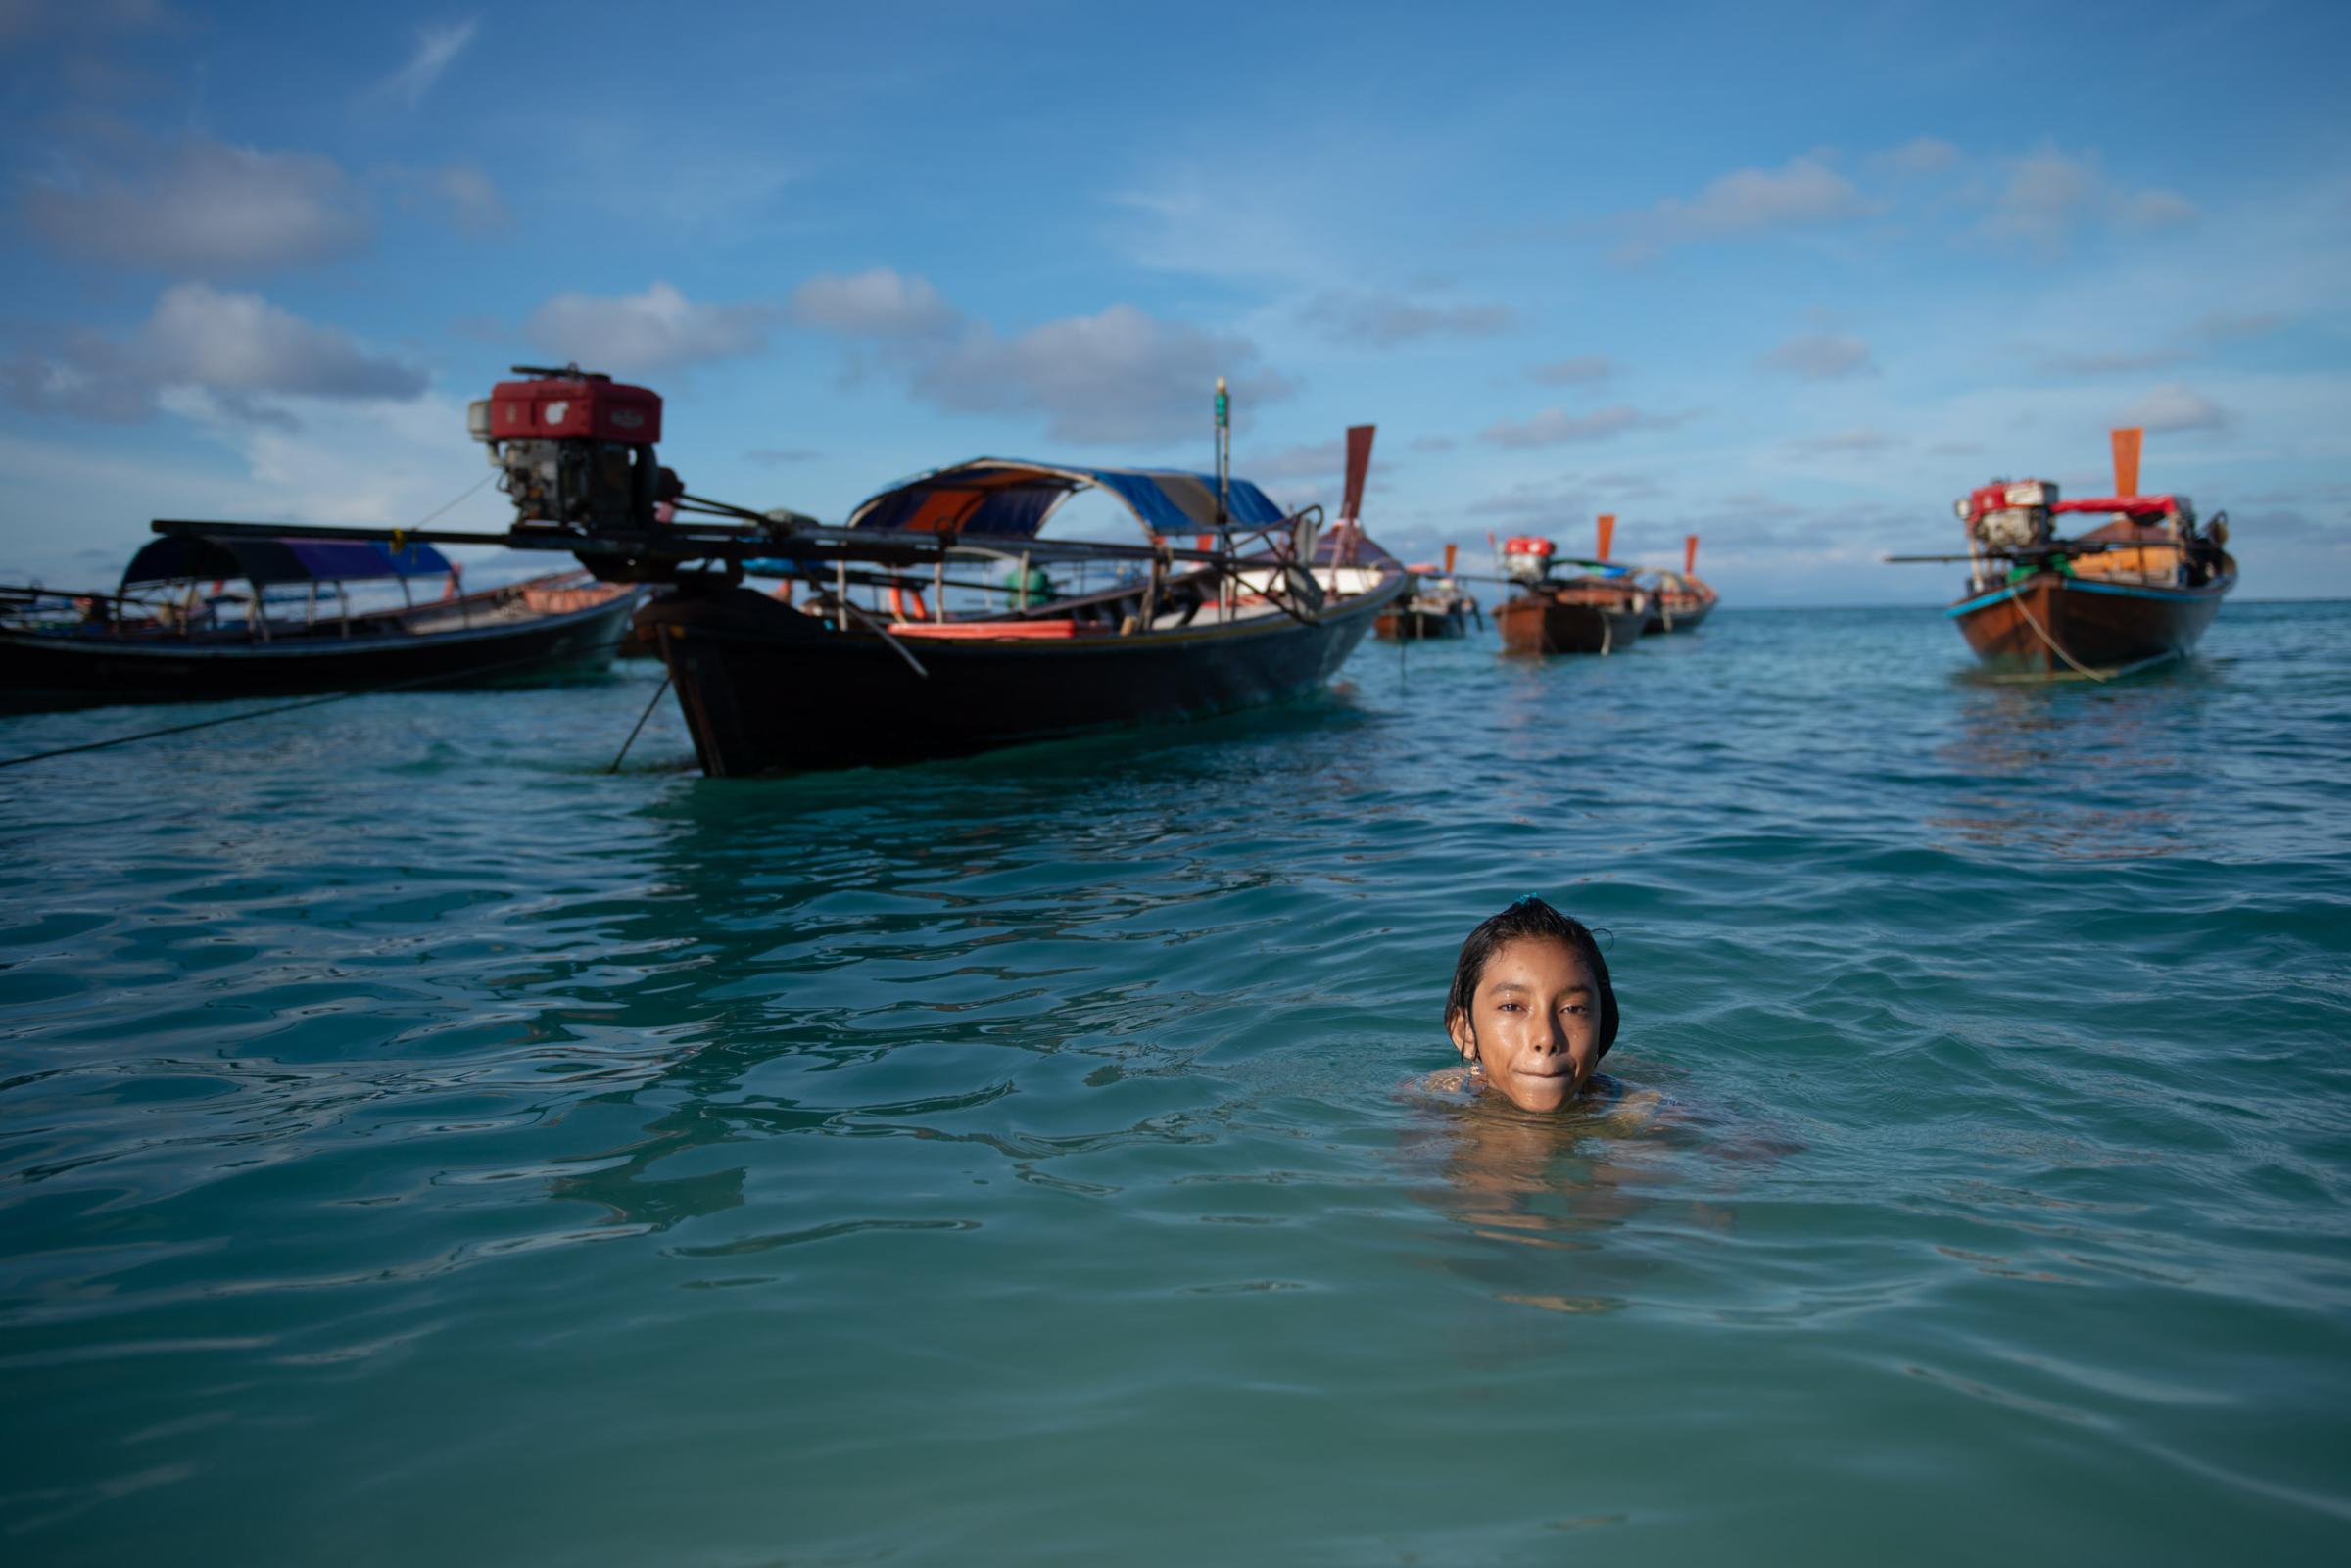 Lipe Island - A young woman swims and raises her head above the surface...